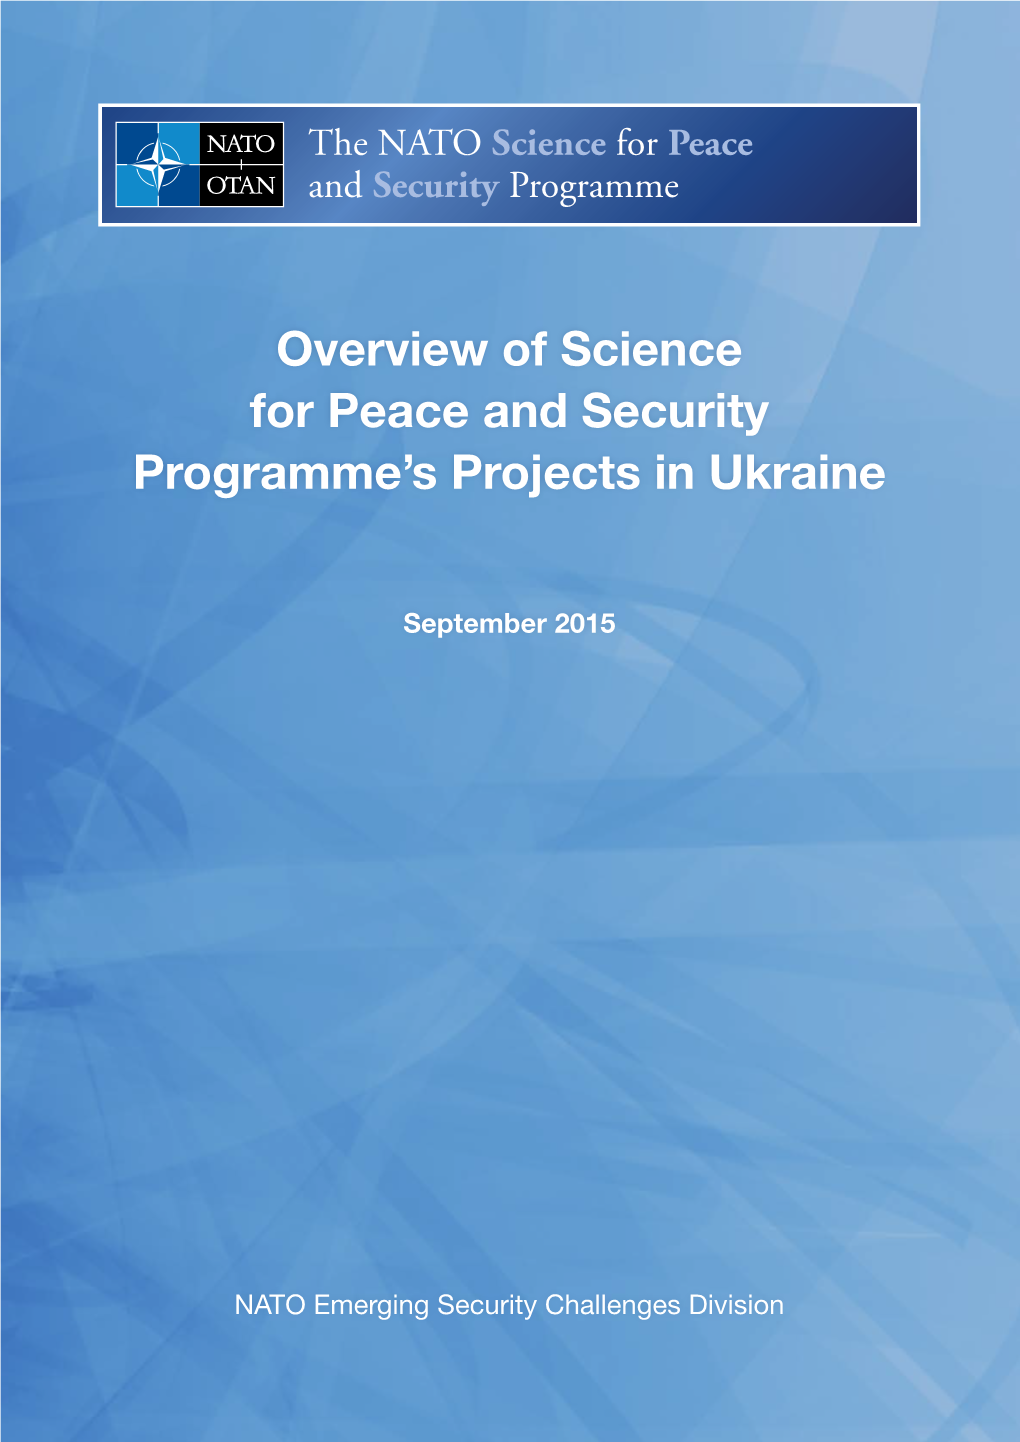 Overview of Science for Peace and Security Programme's Projects In